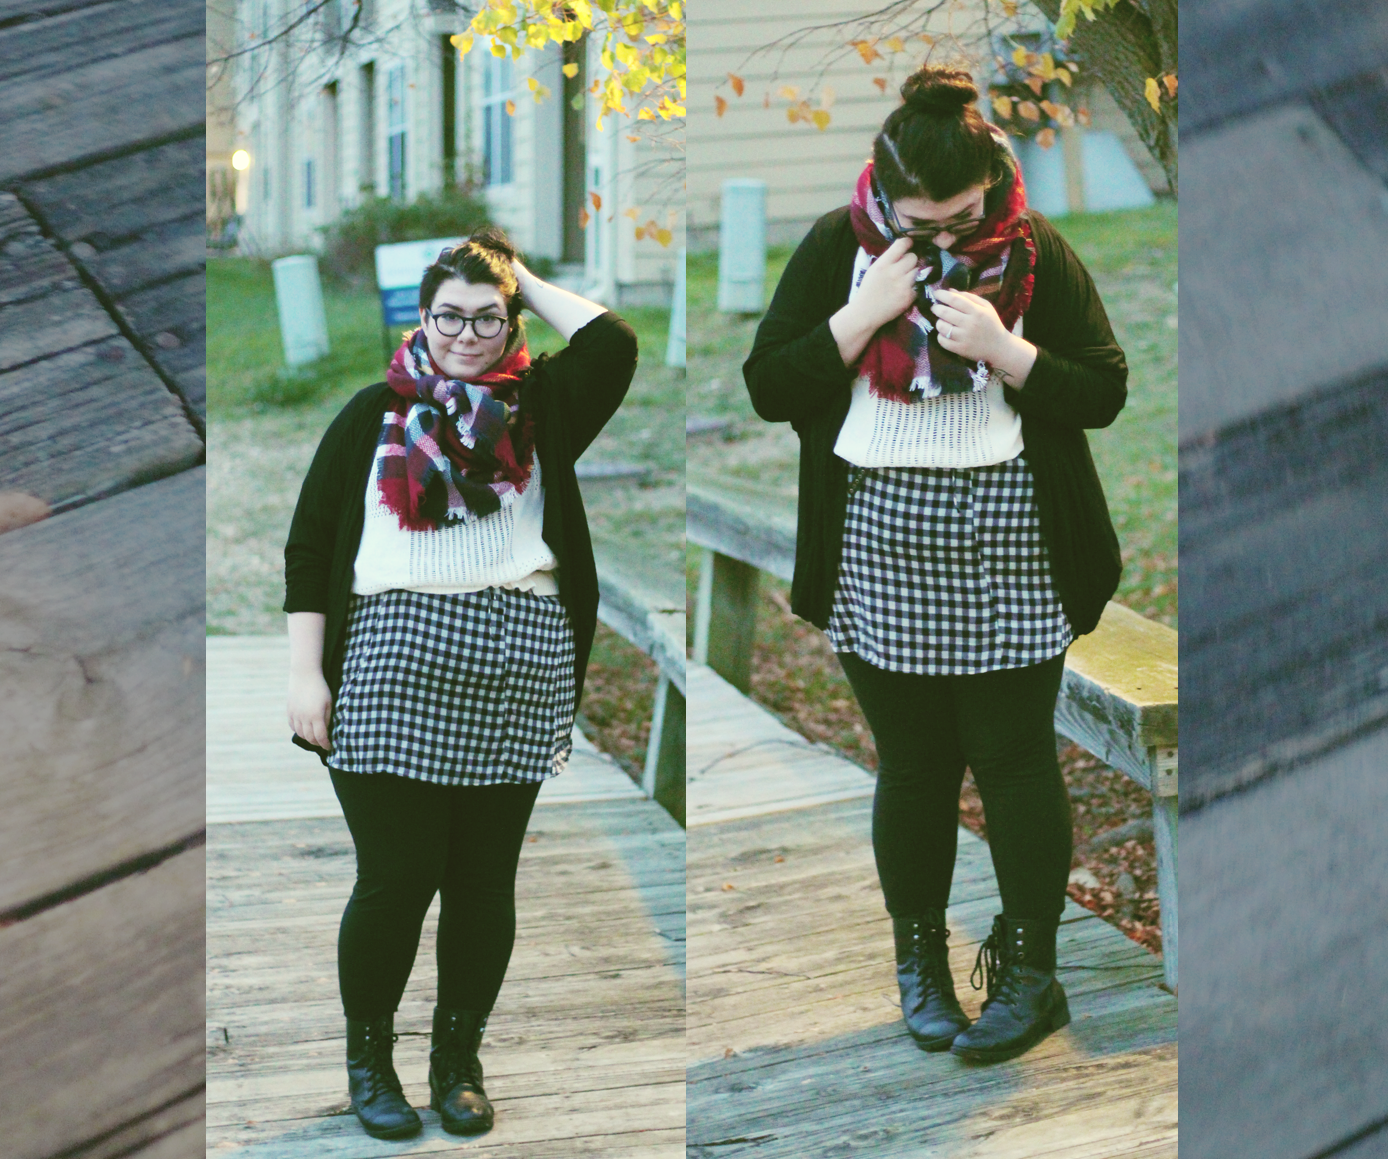 Dusters & Scarves | www.katielikeme.com #fashion #outfit #plussize